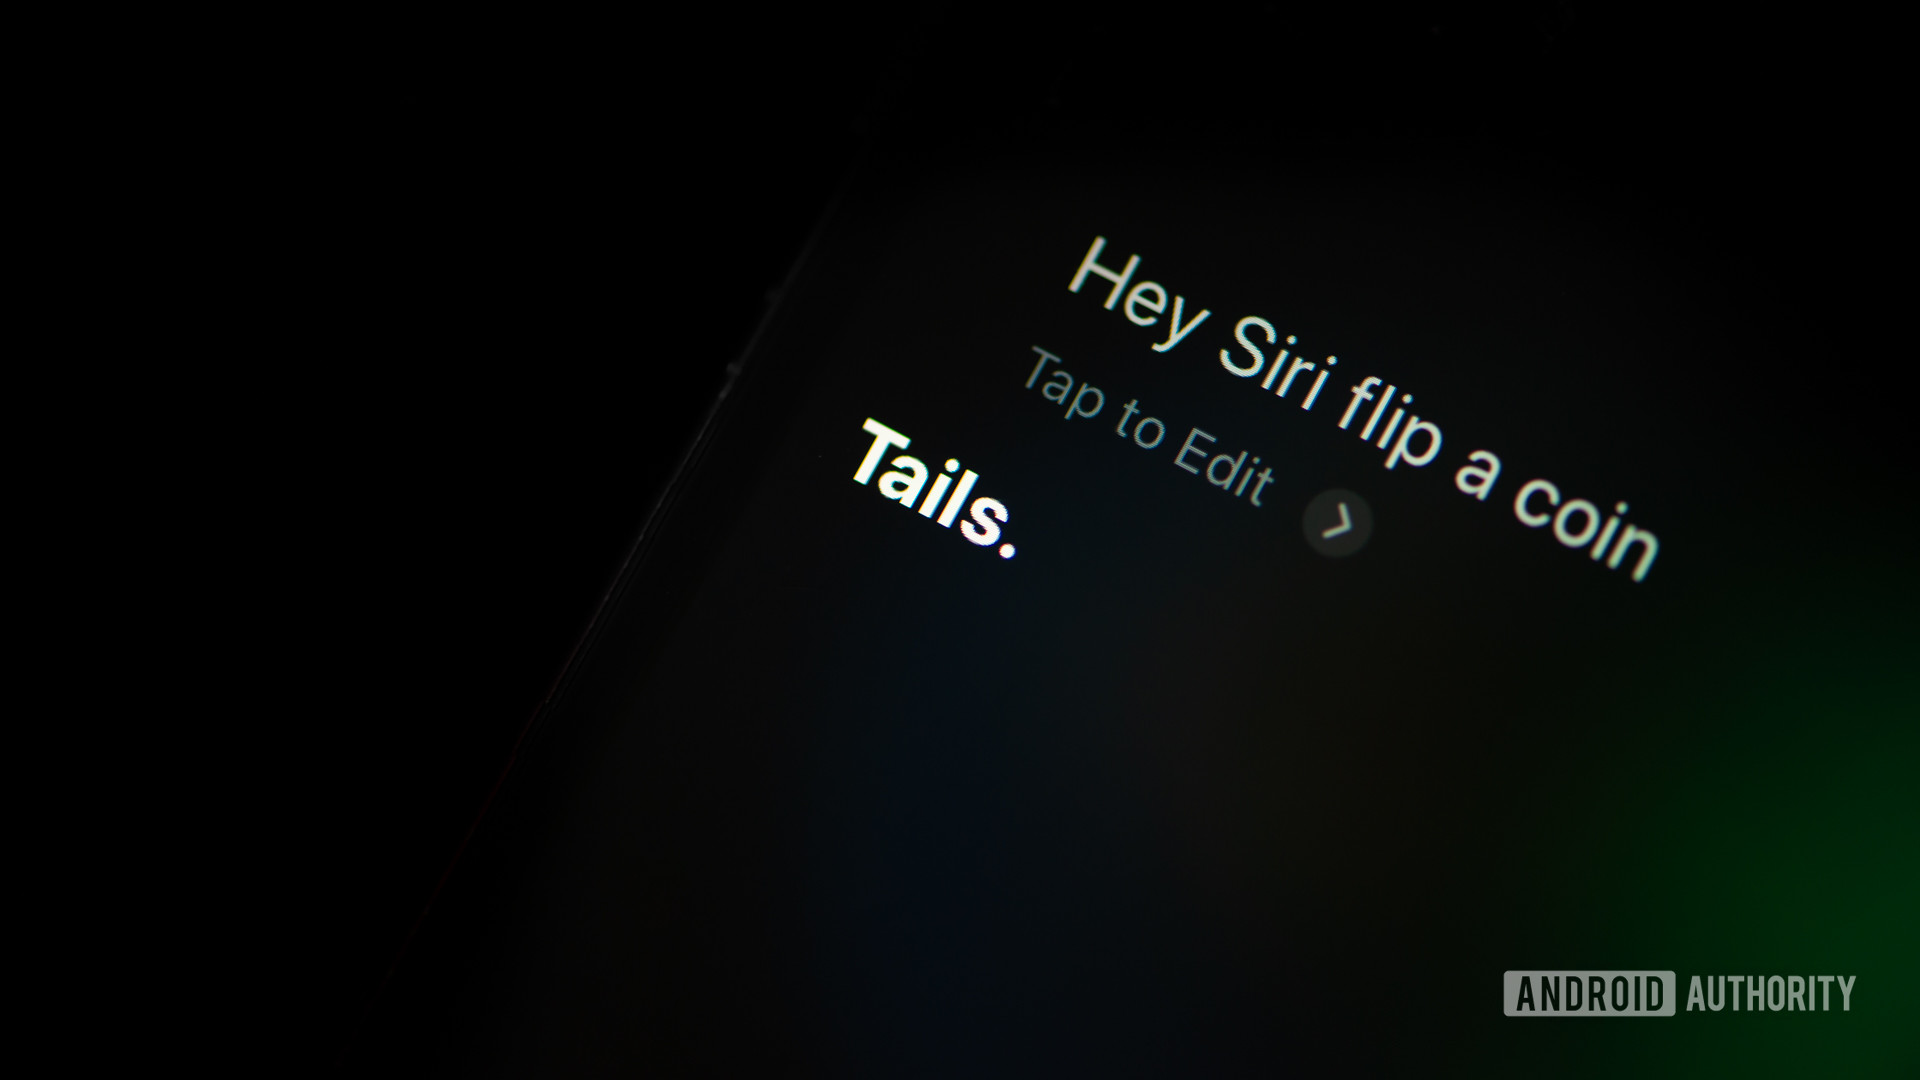 50 fun things to ask Siri for a good laugh - Android Authority